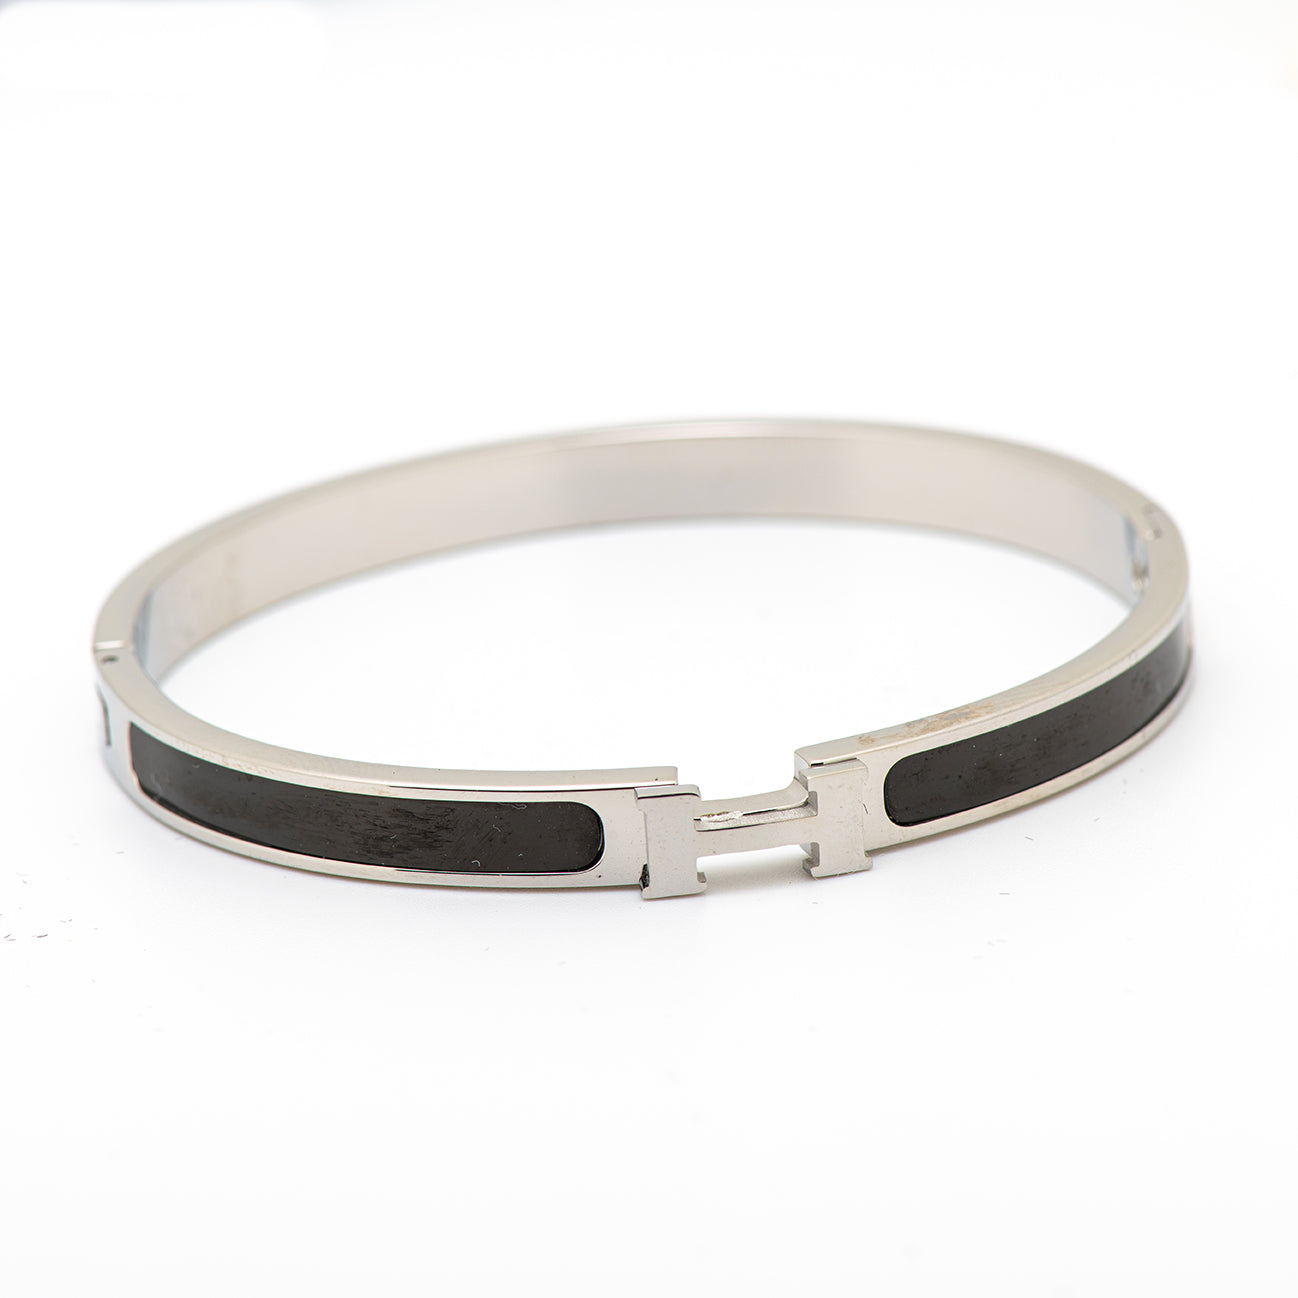 Stainless steel H bangle.